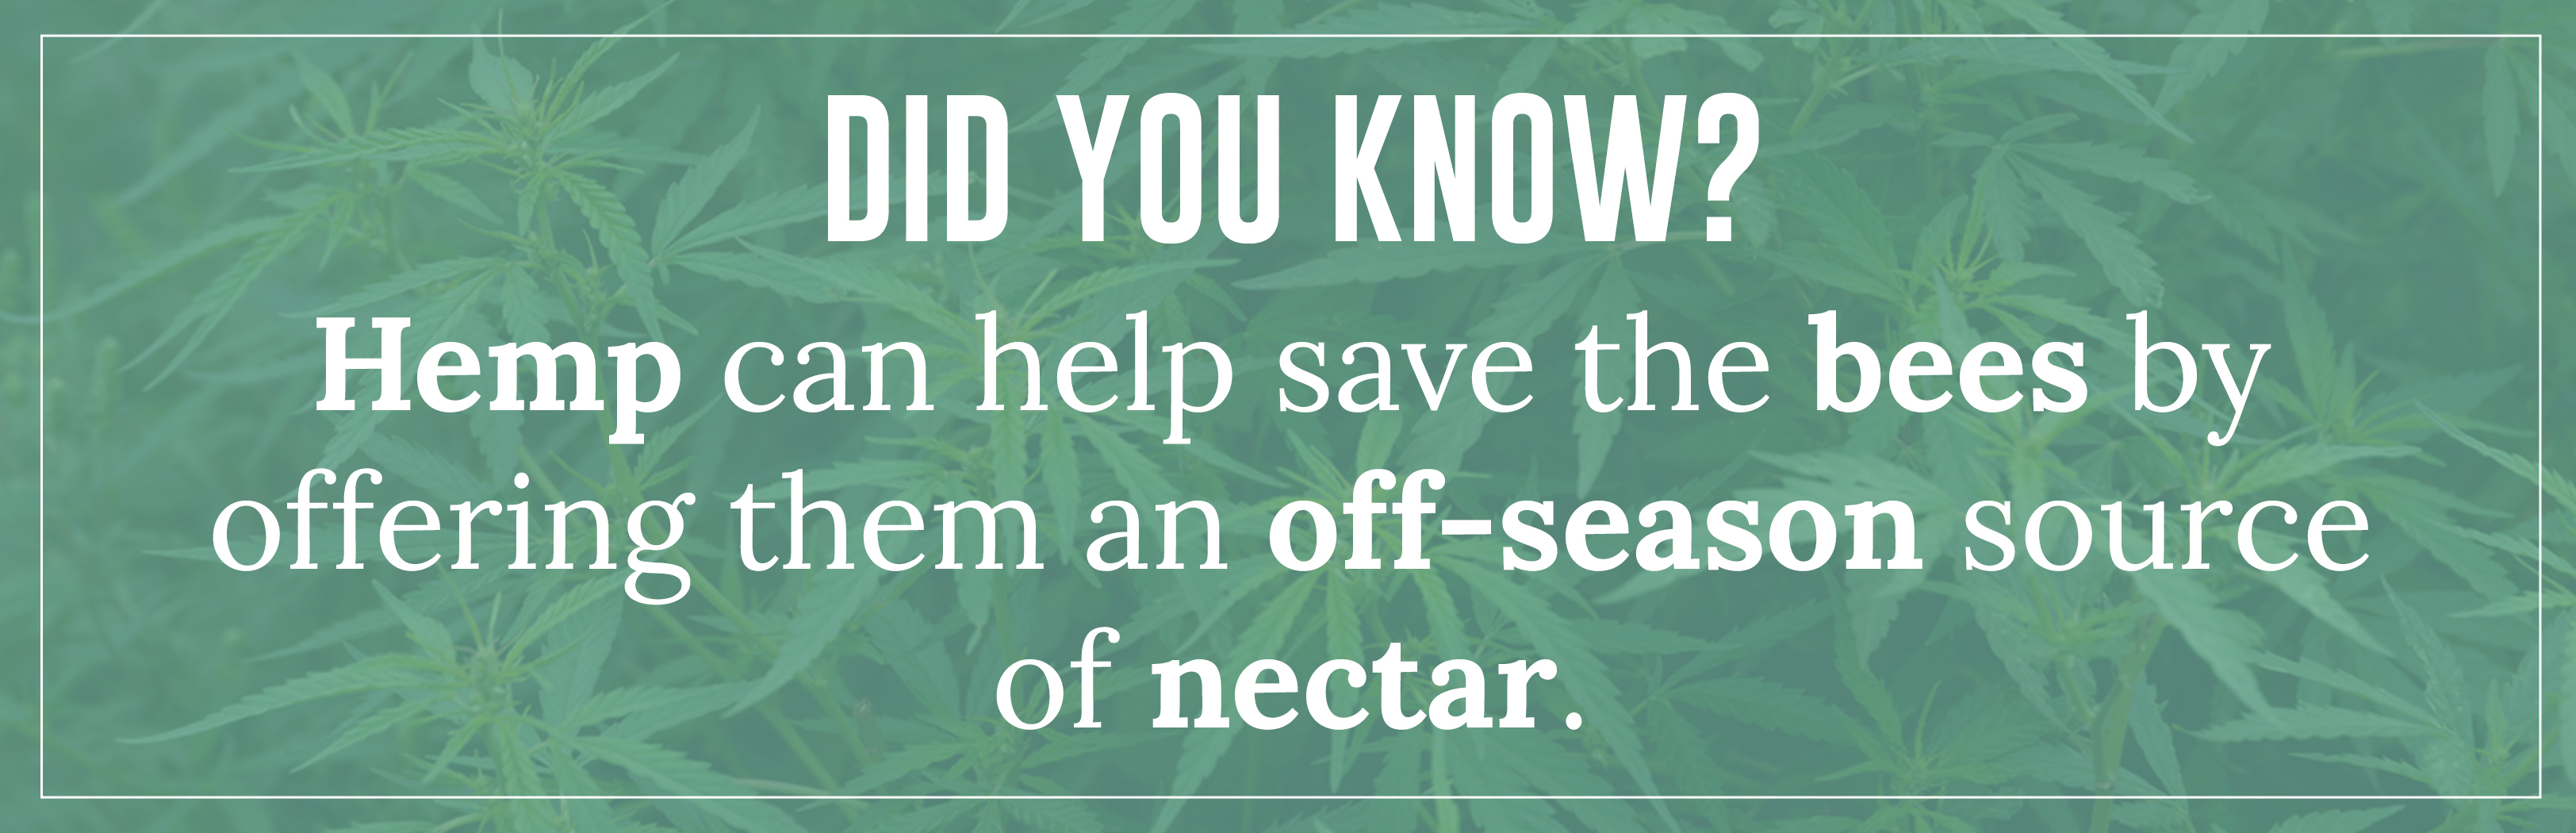 Hemp can help save the bees by offering them an off-season source of nectar.